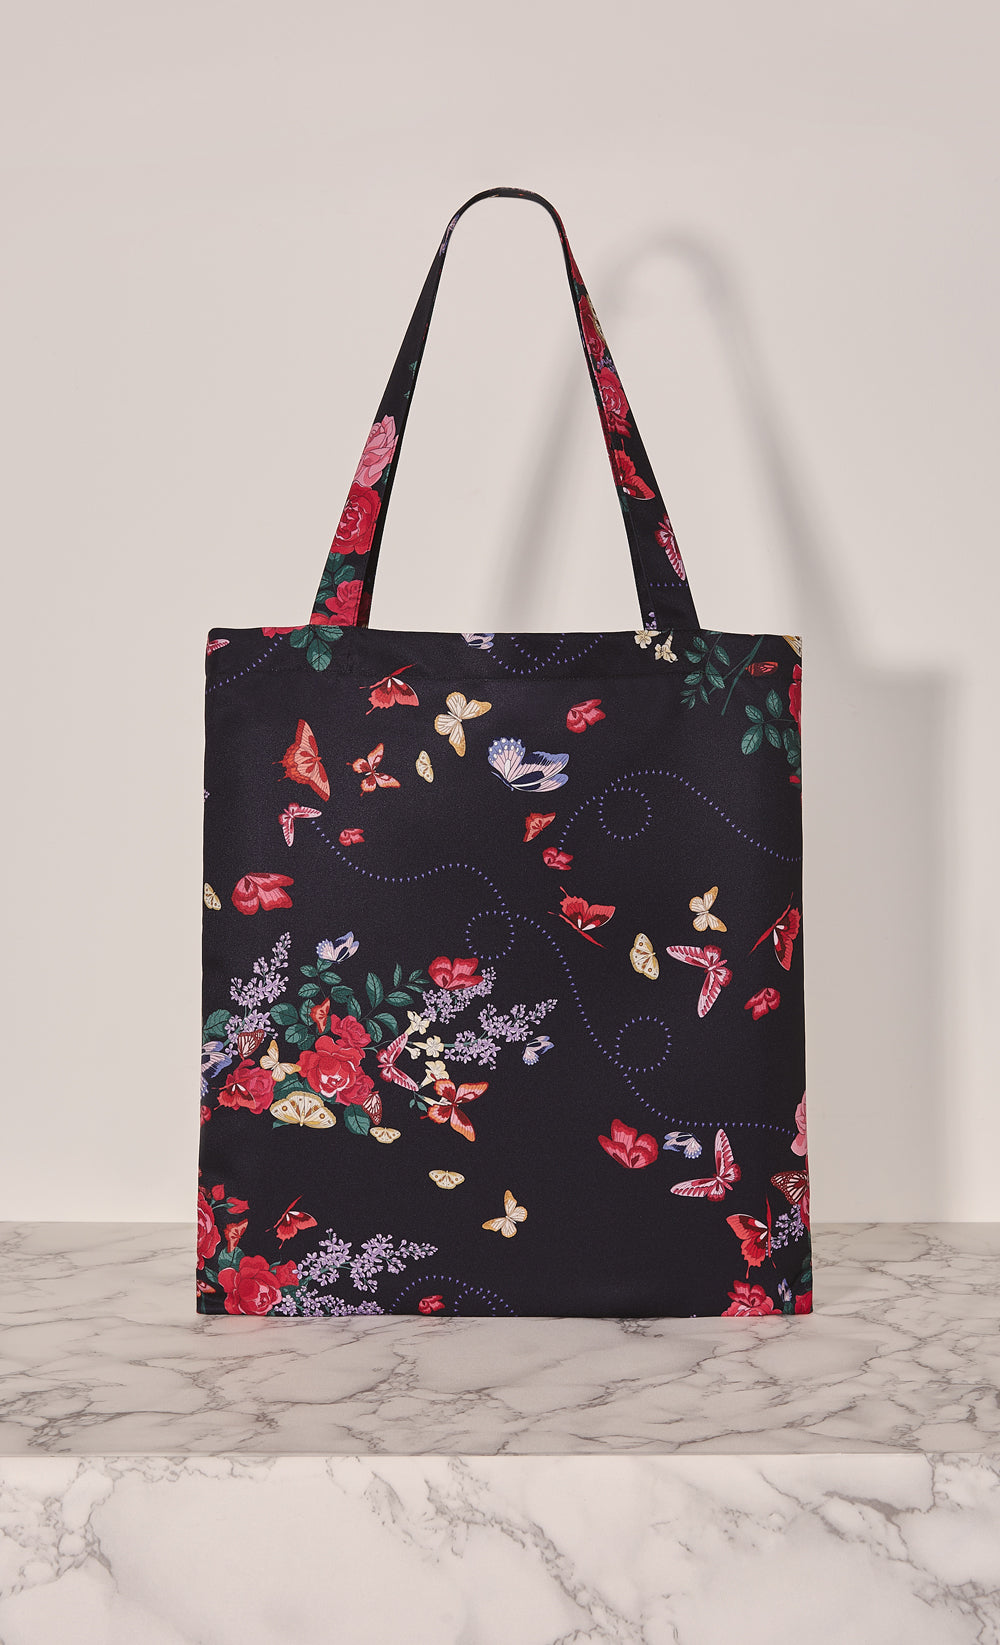 The Butterfly dUCk Totes in Prosper